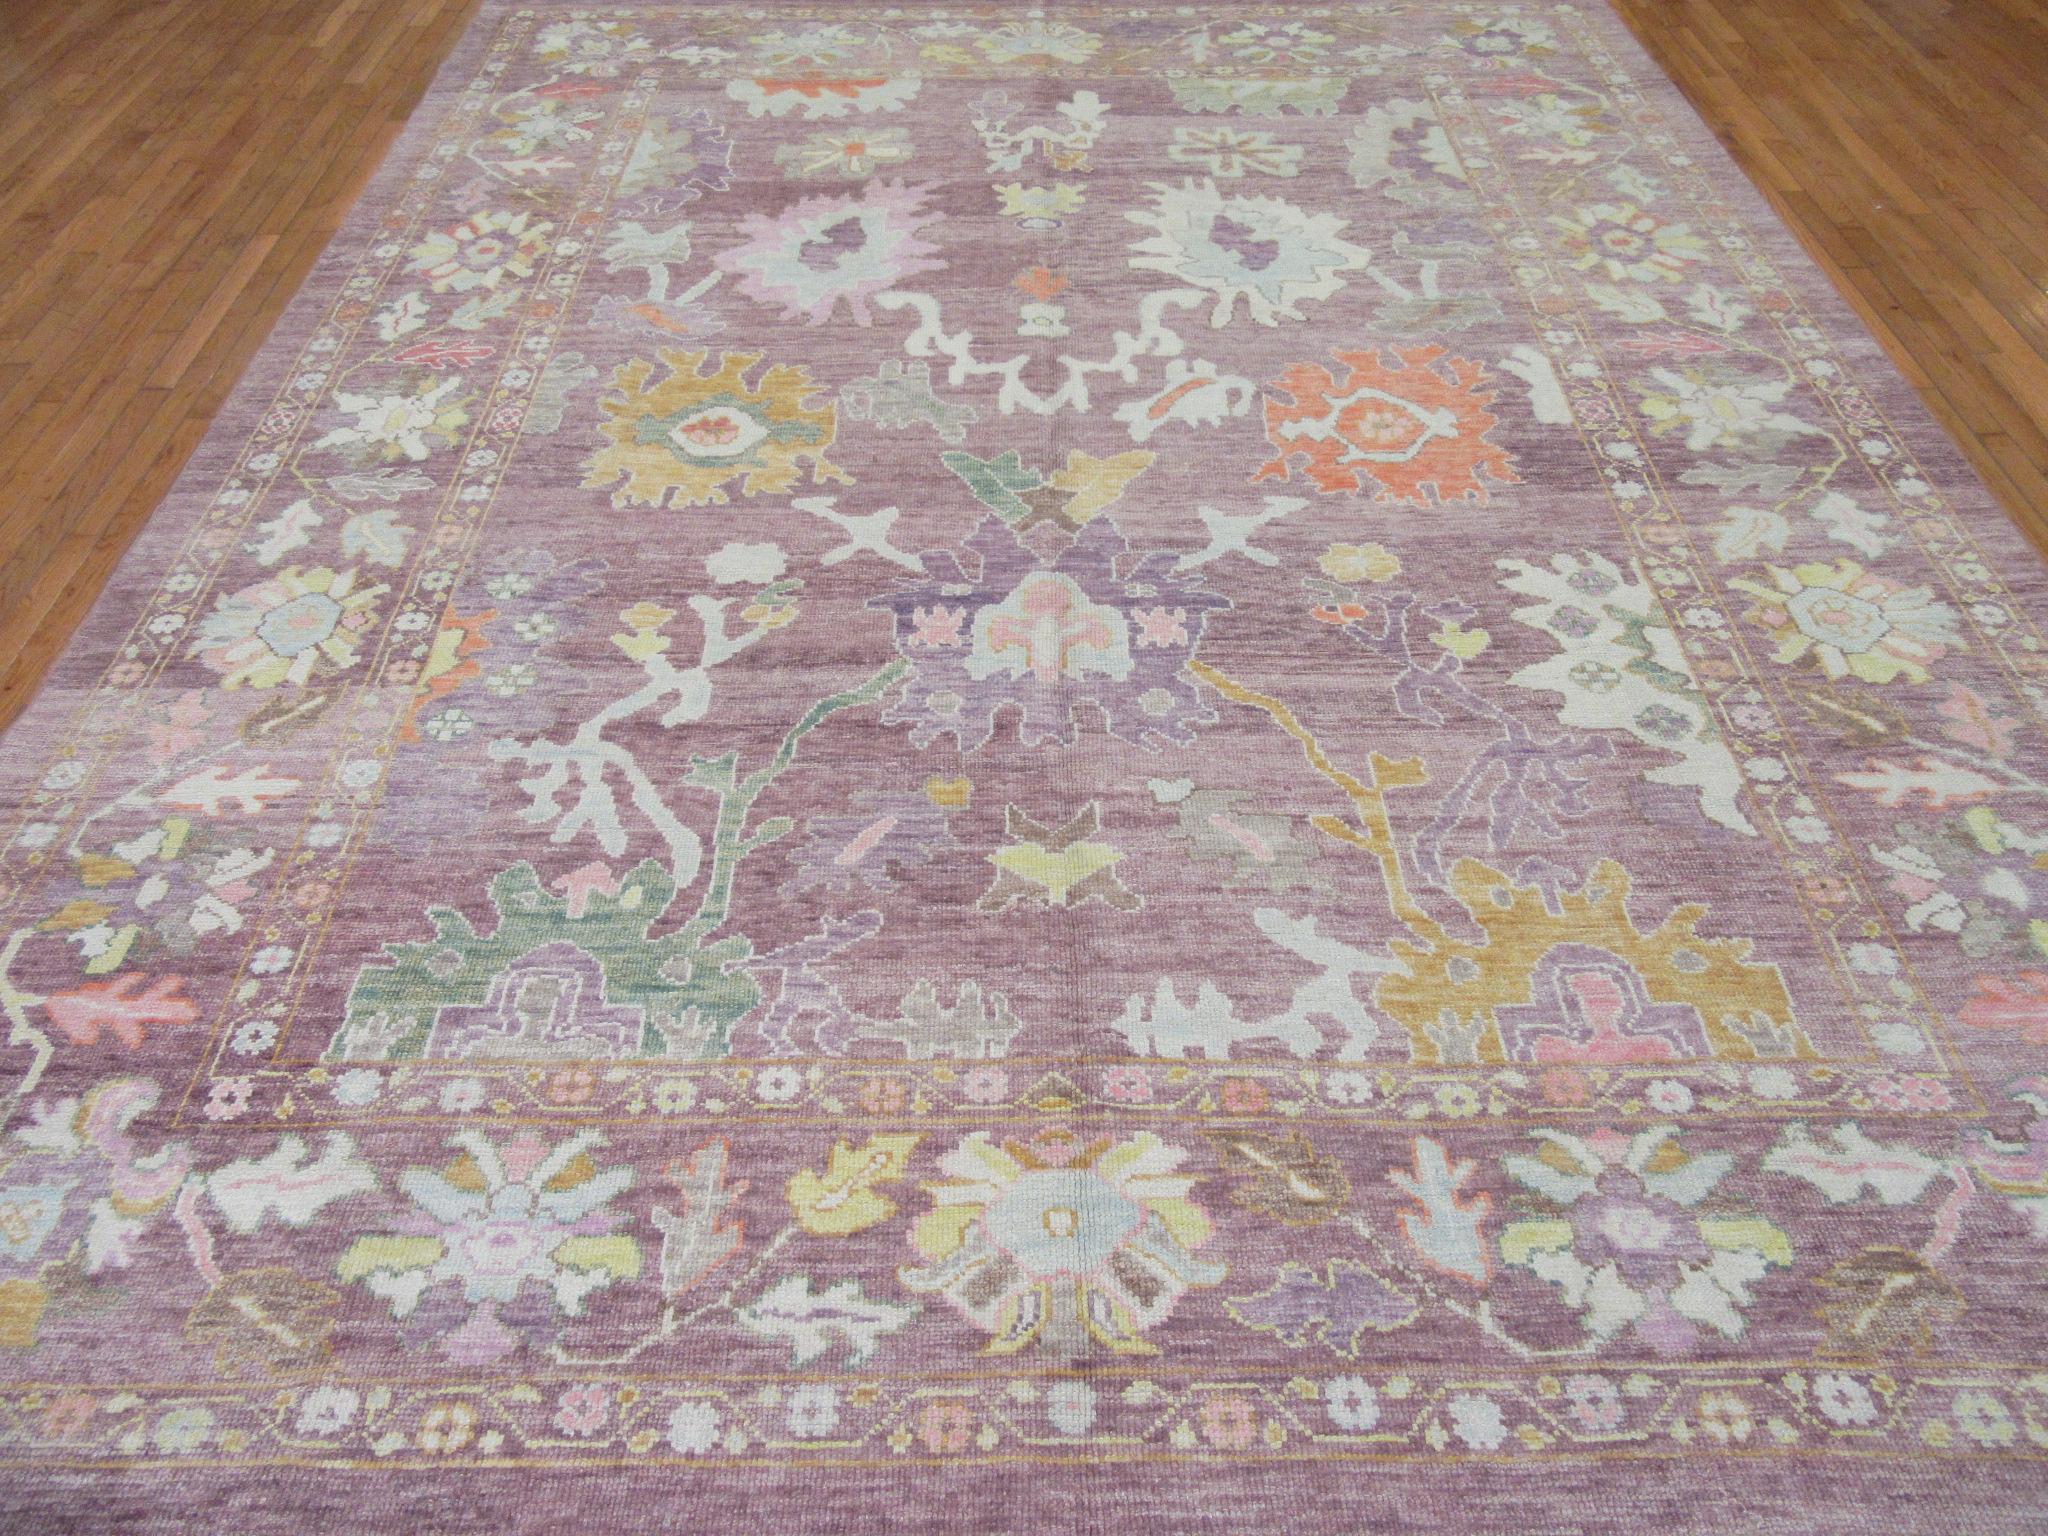 This is a new hand knotted Oushak design rug from Turkey. It is made with wool pile and wool on a wool foundation in soft colorful tones. Its transitional all-over pattern would make it a perfect choice for any room. The rug measures 9' 7'' x 12'